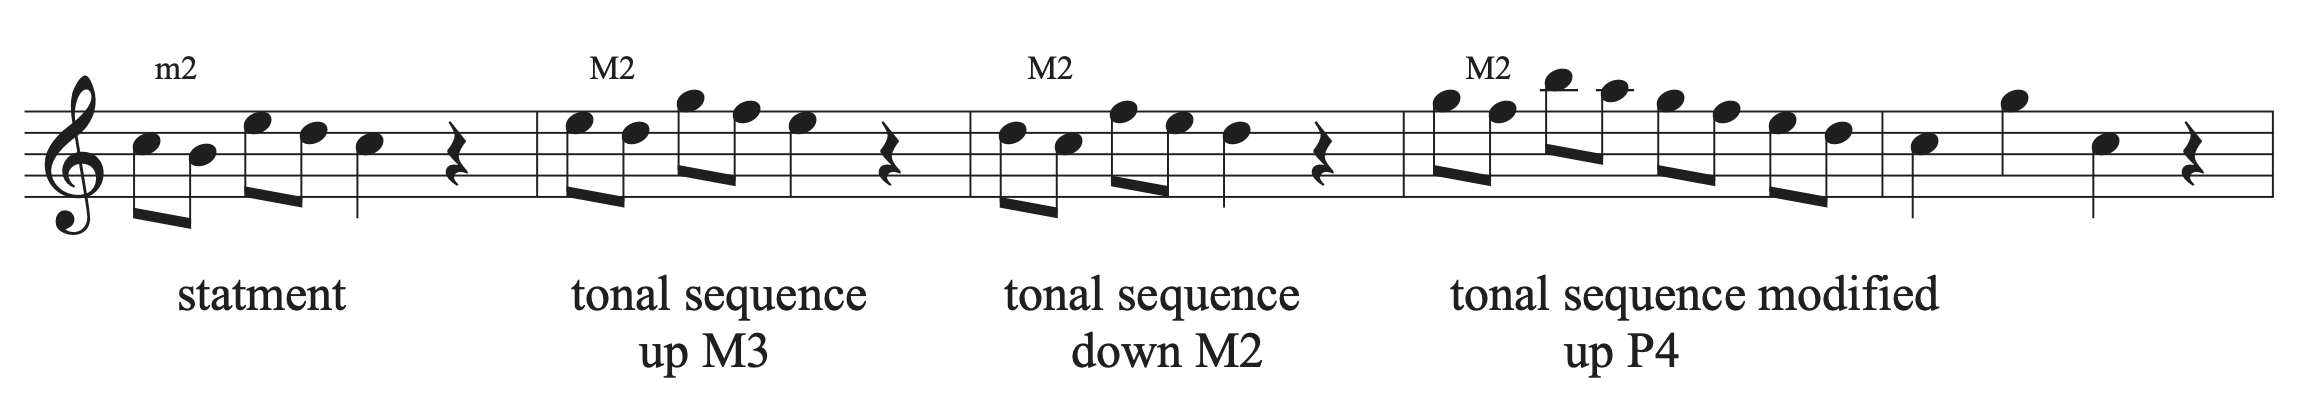 A statement followed by 3 repetitions of a sequence.